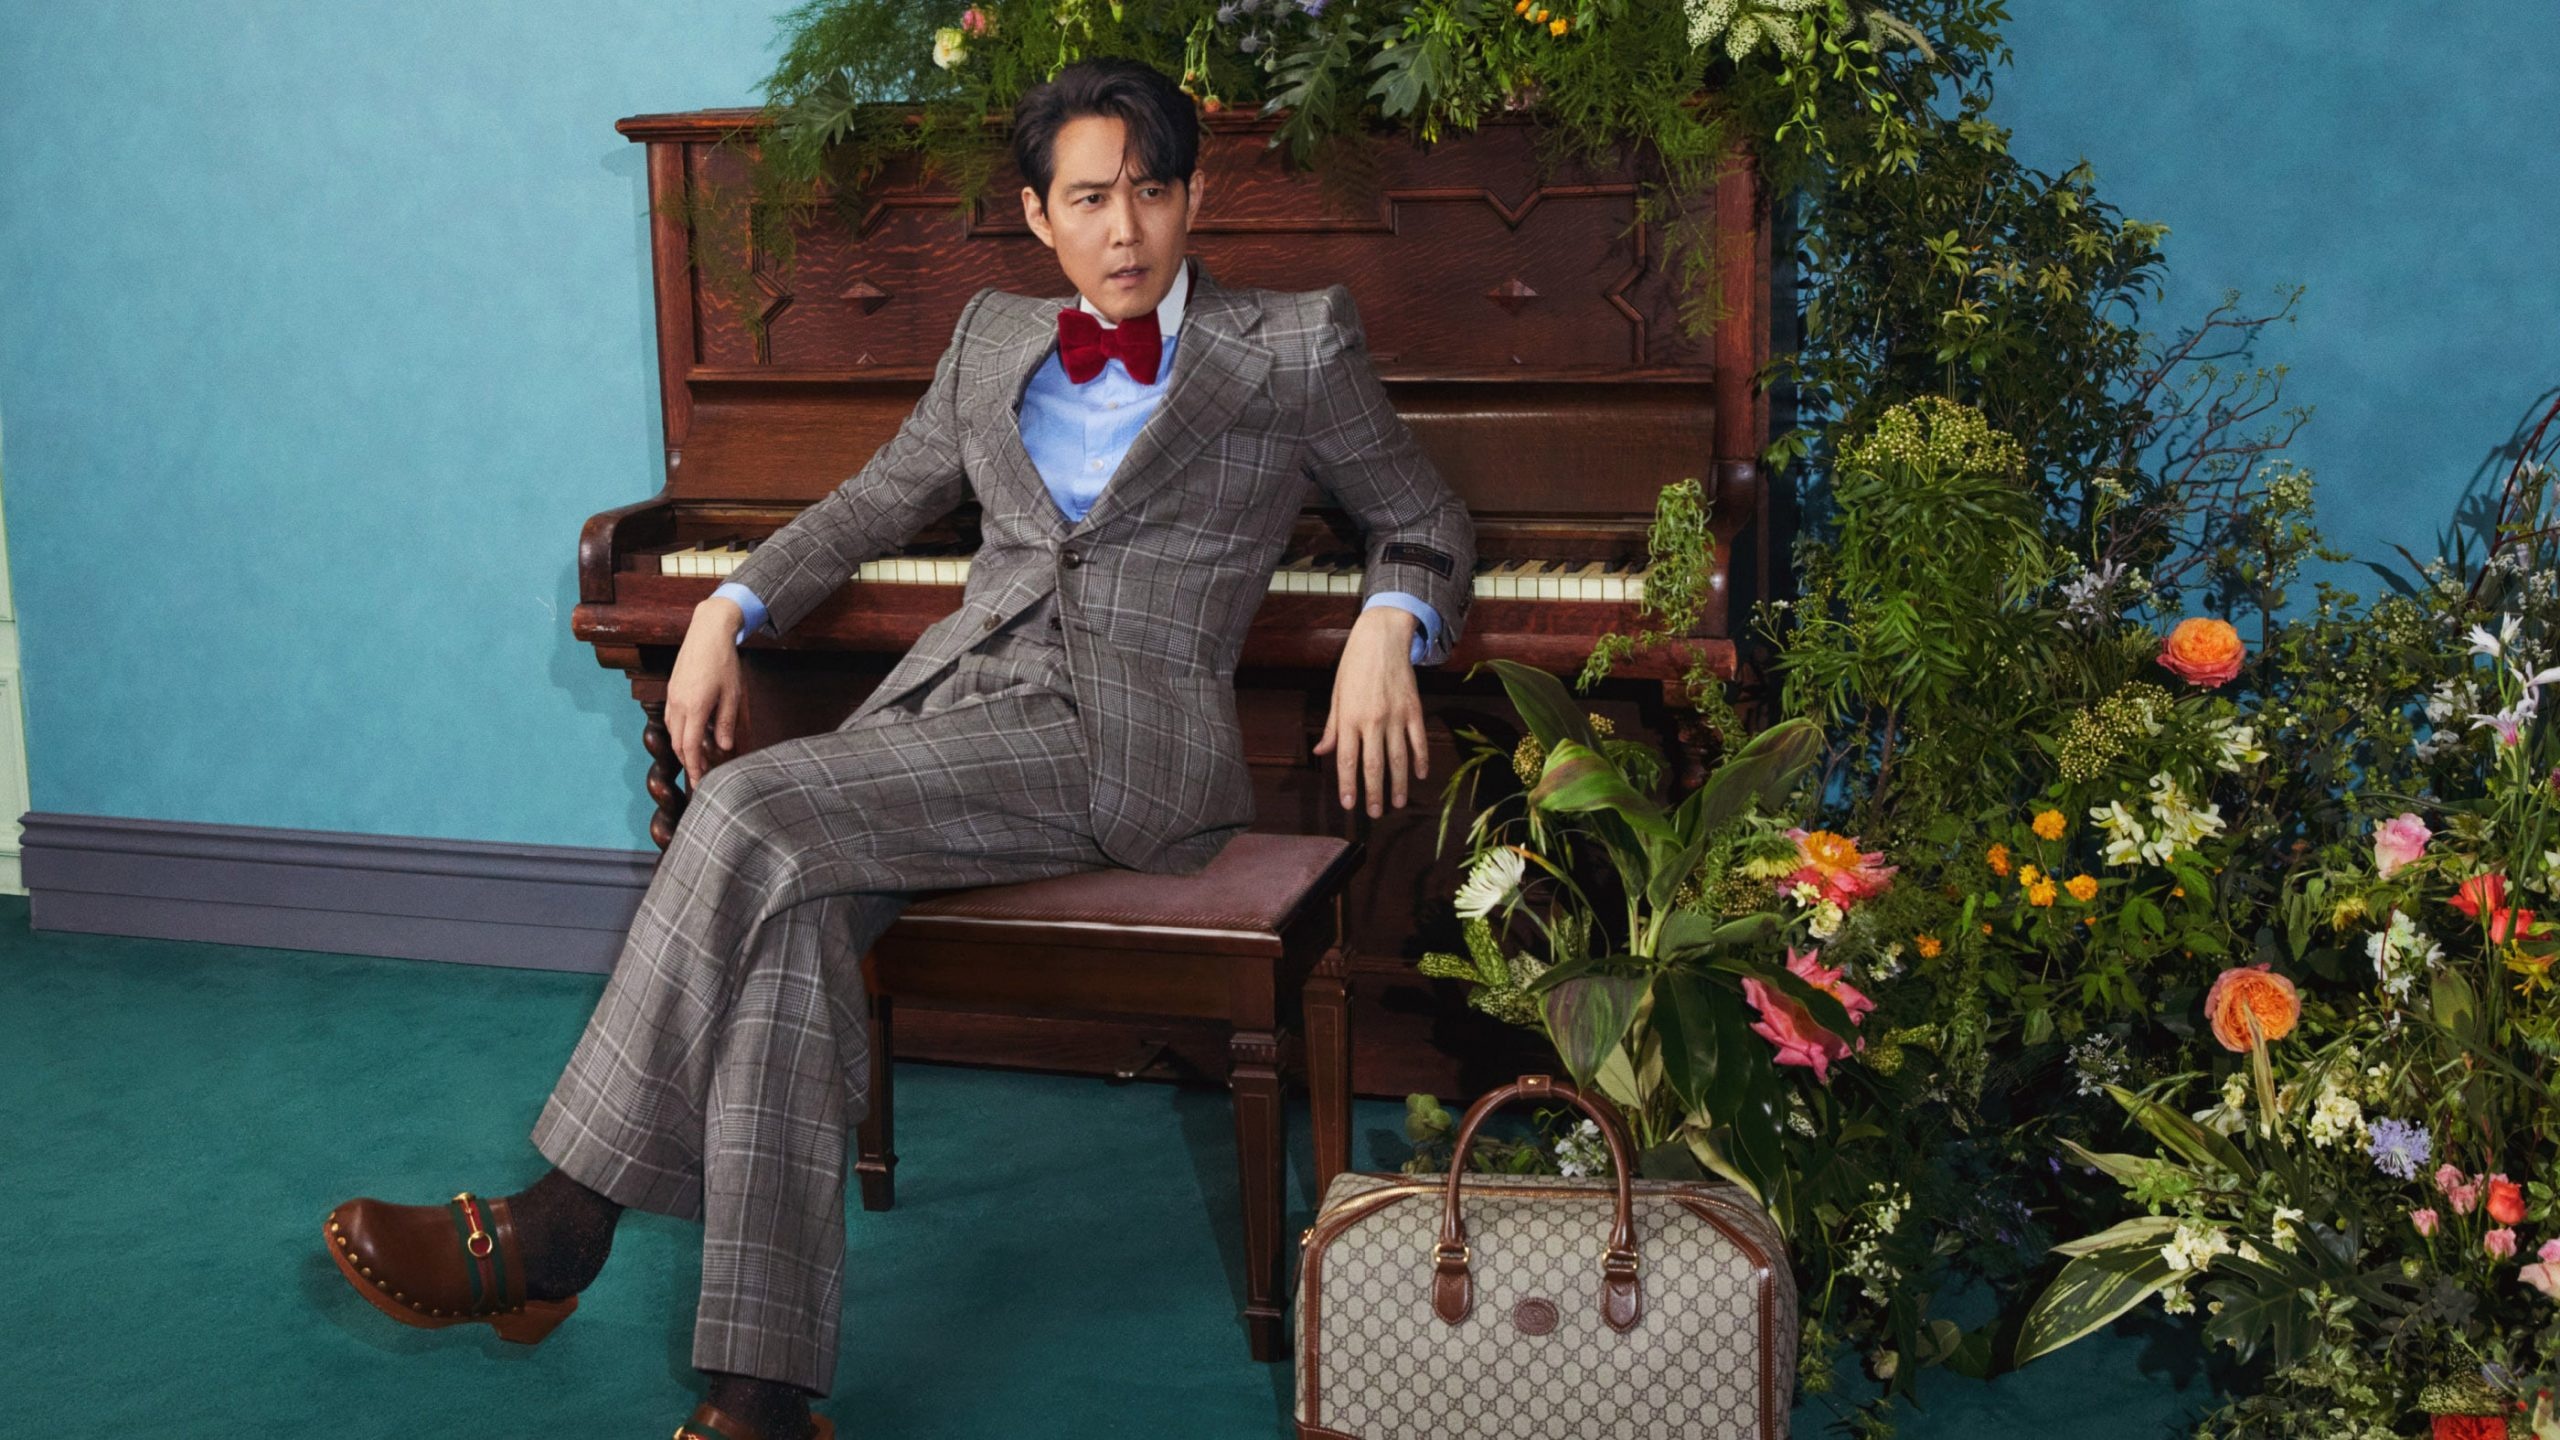 HSBC has downgraded Kering from “buy” to “hold” as investors question Gucci's future under Sabato De Sarno. What will it take to reignite the brand? Photo: Gucci